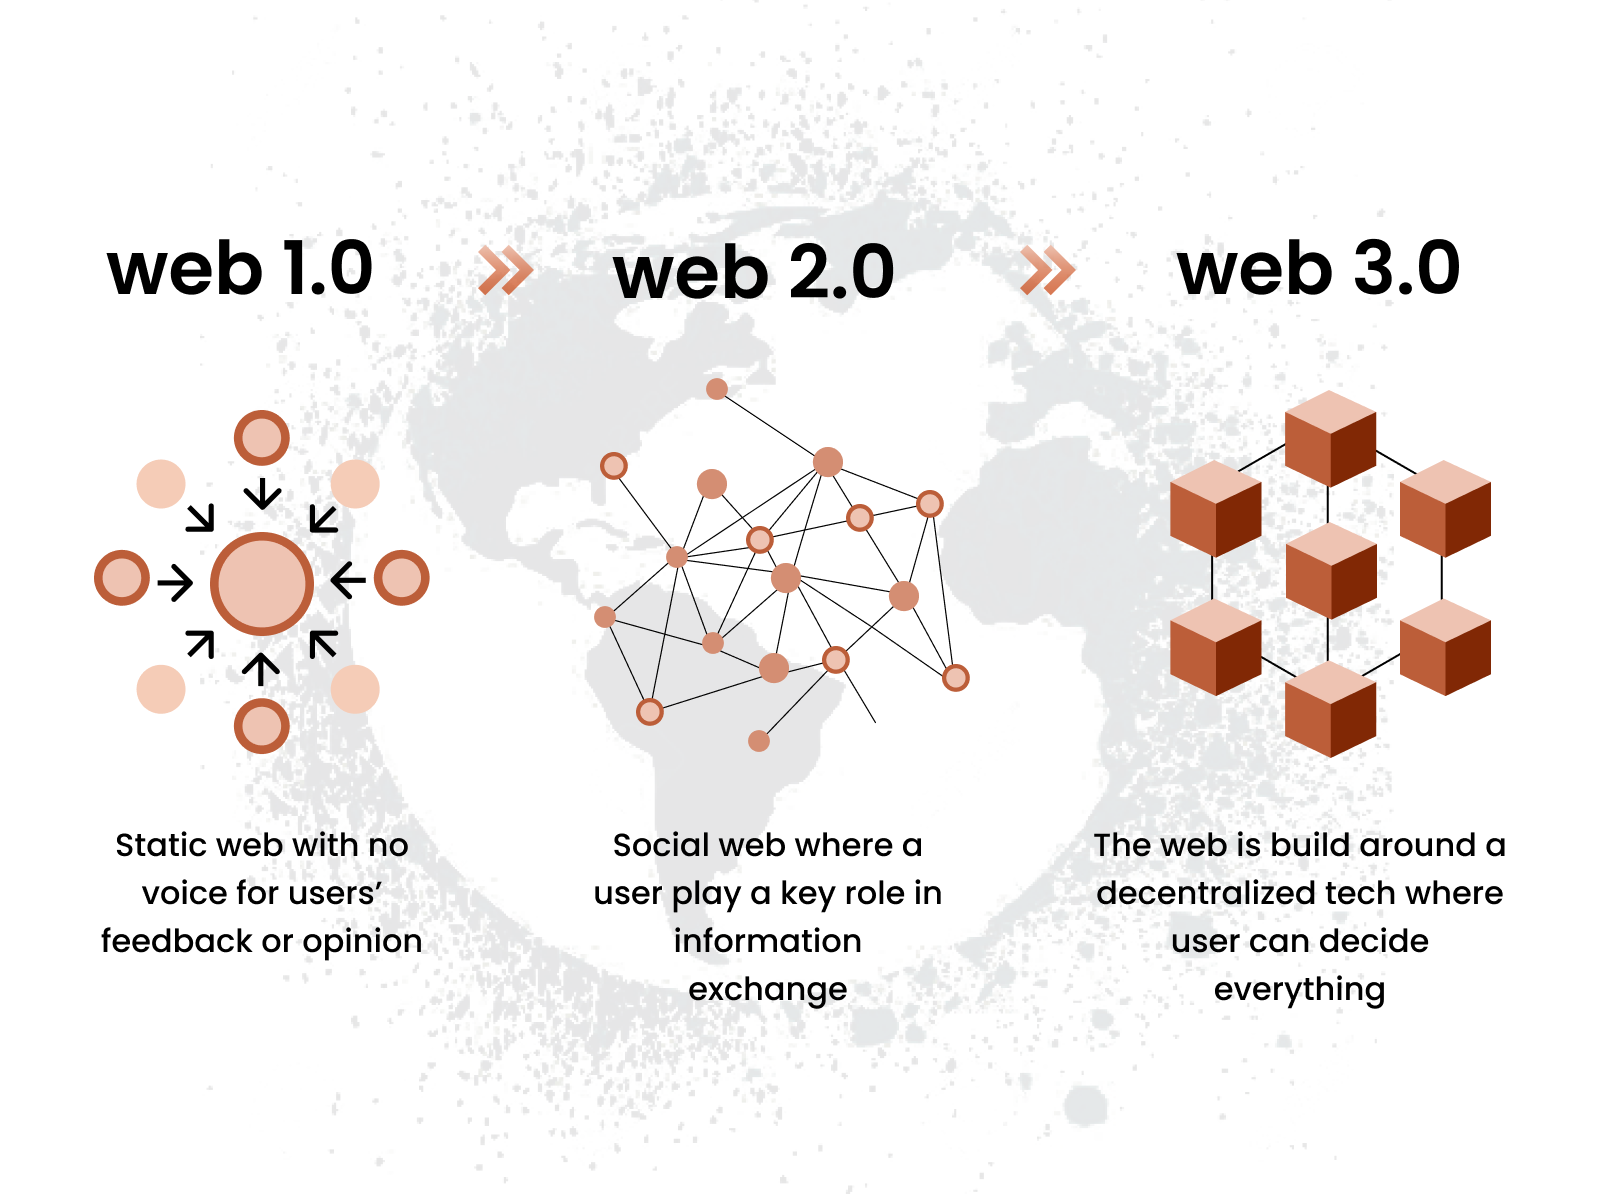 Evolution of the Web (1.0 to 2.0 to 3.0)